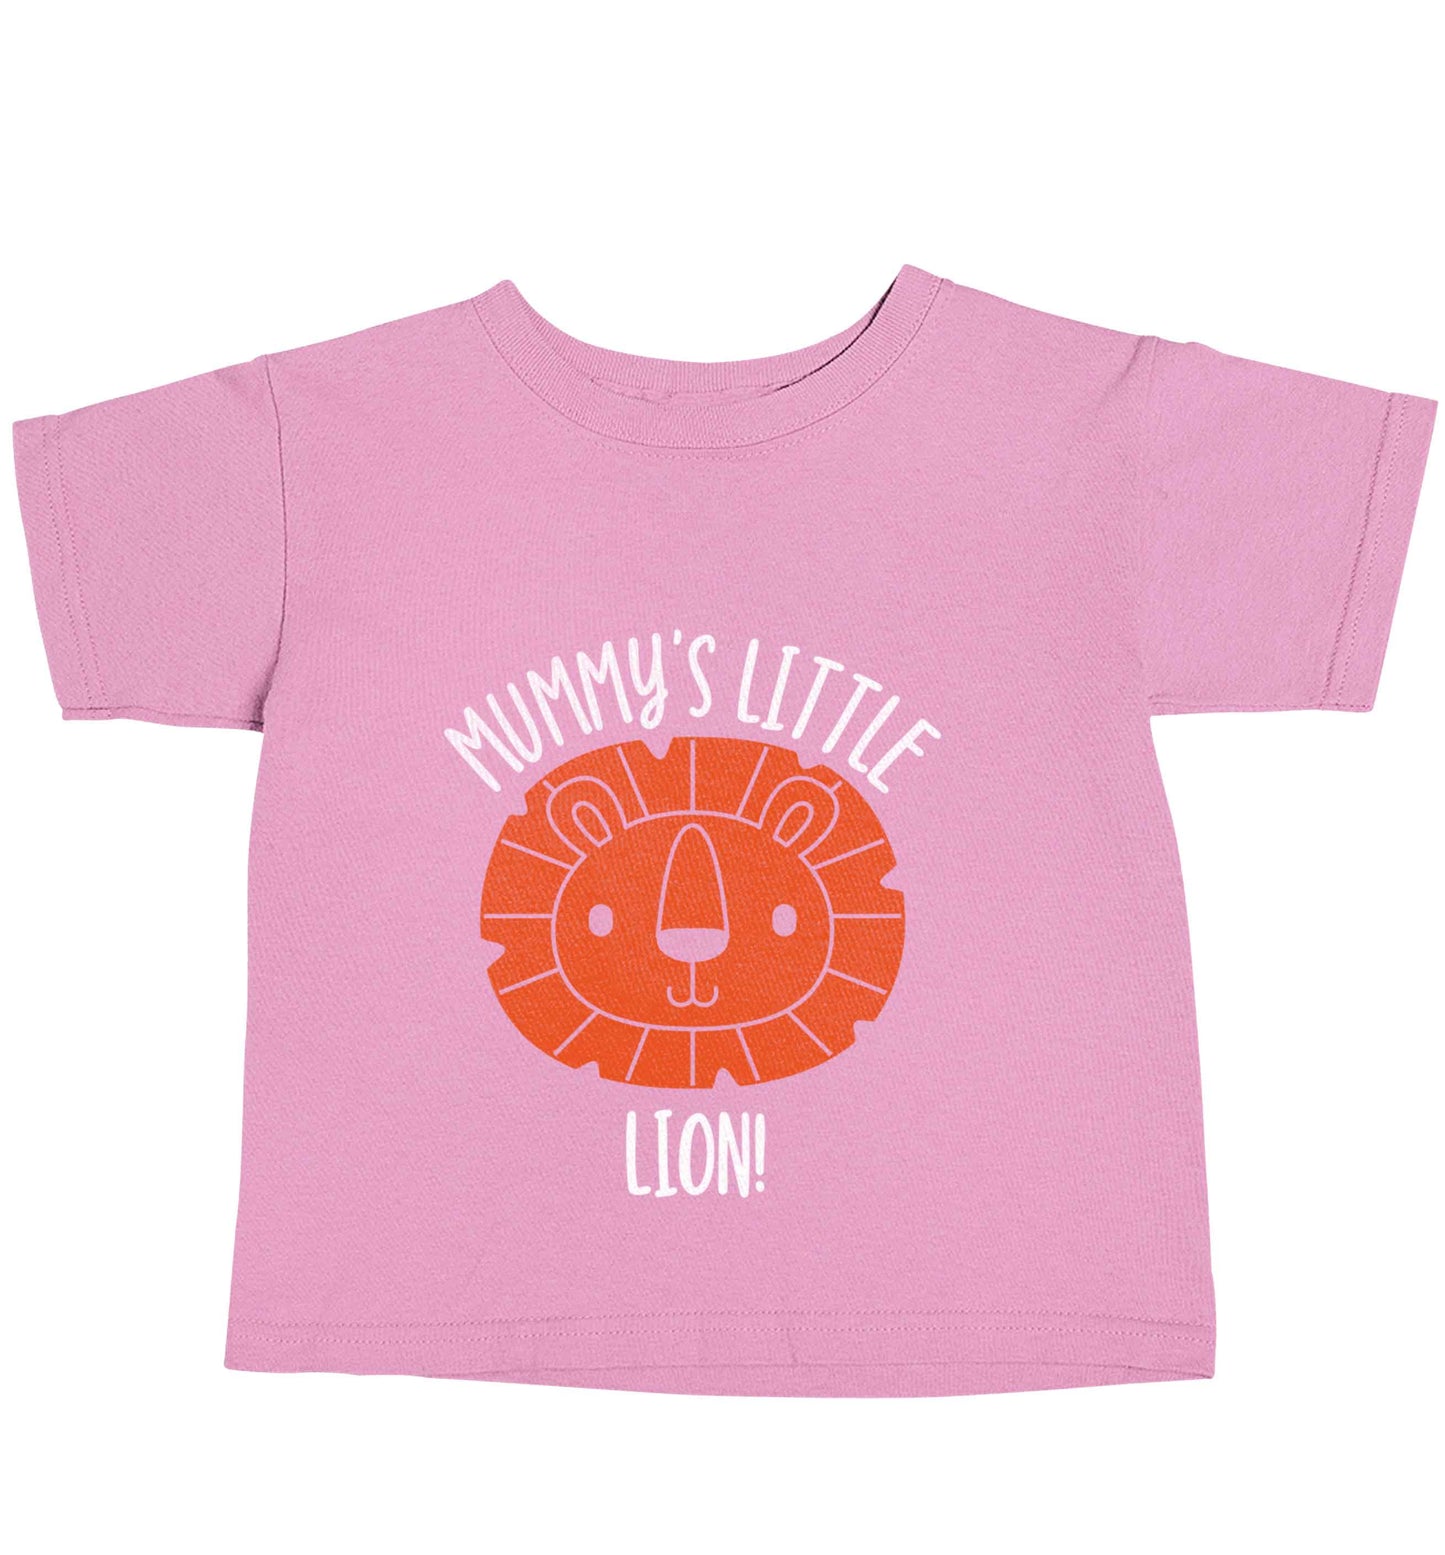 Mummy's little lion light pink baby toddler Tshirt 2 Years